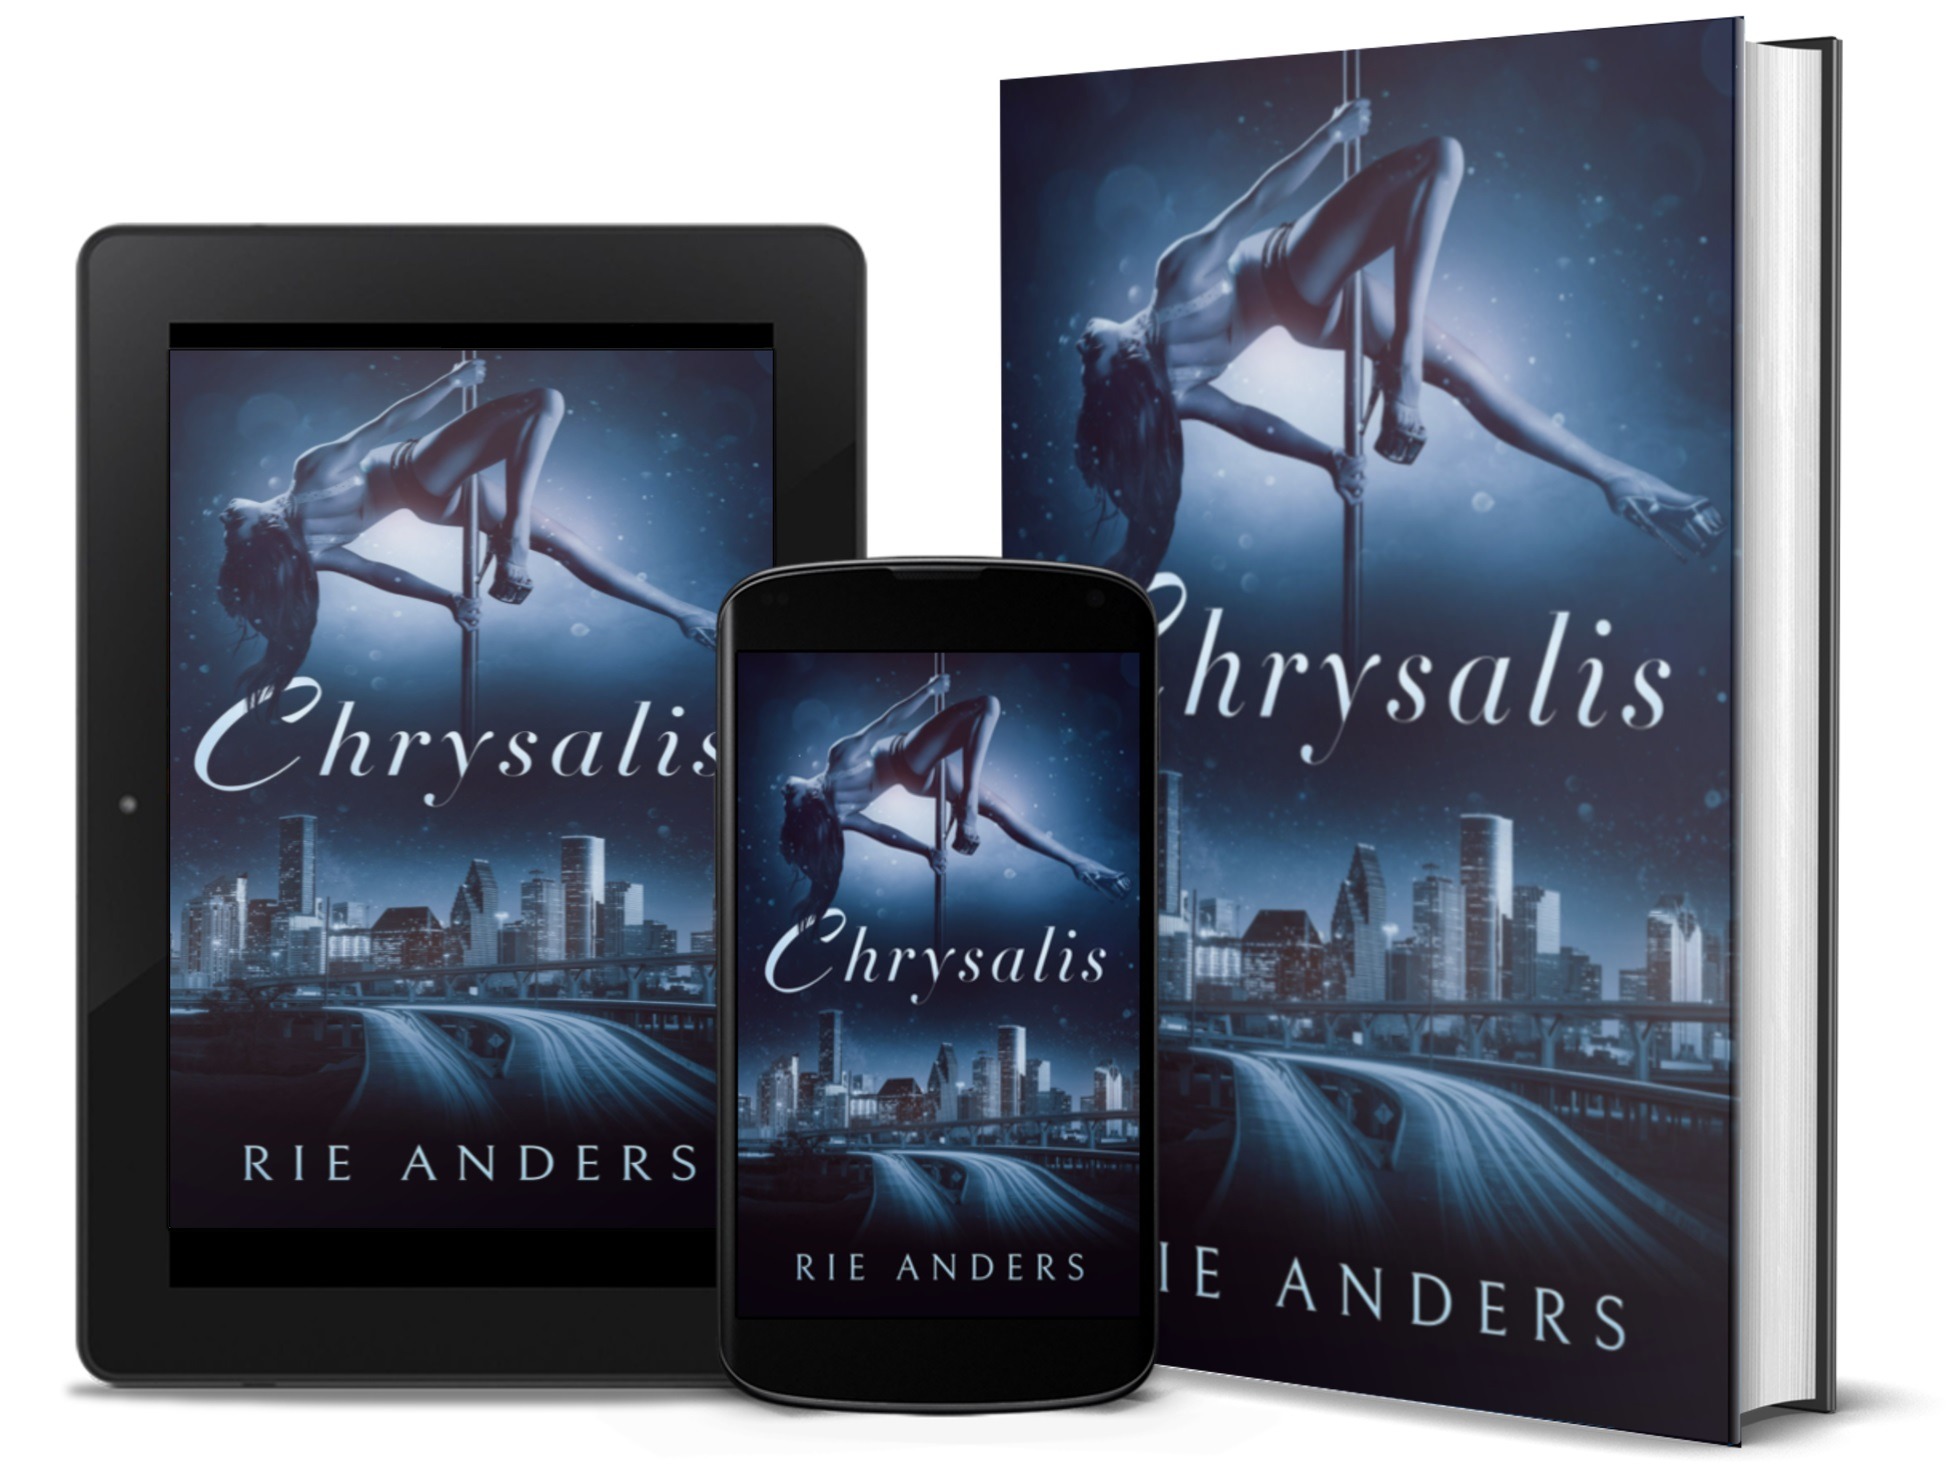 Chrysalis by Rie Anders. Polished by book editor Ashleigh Bonner.